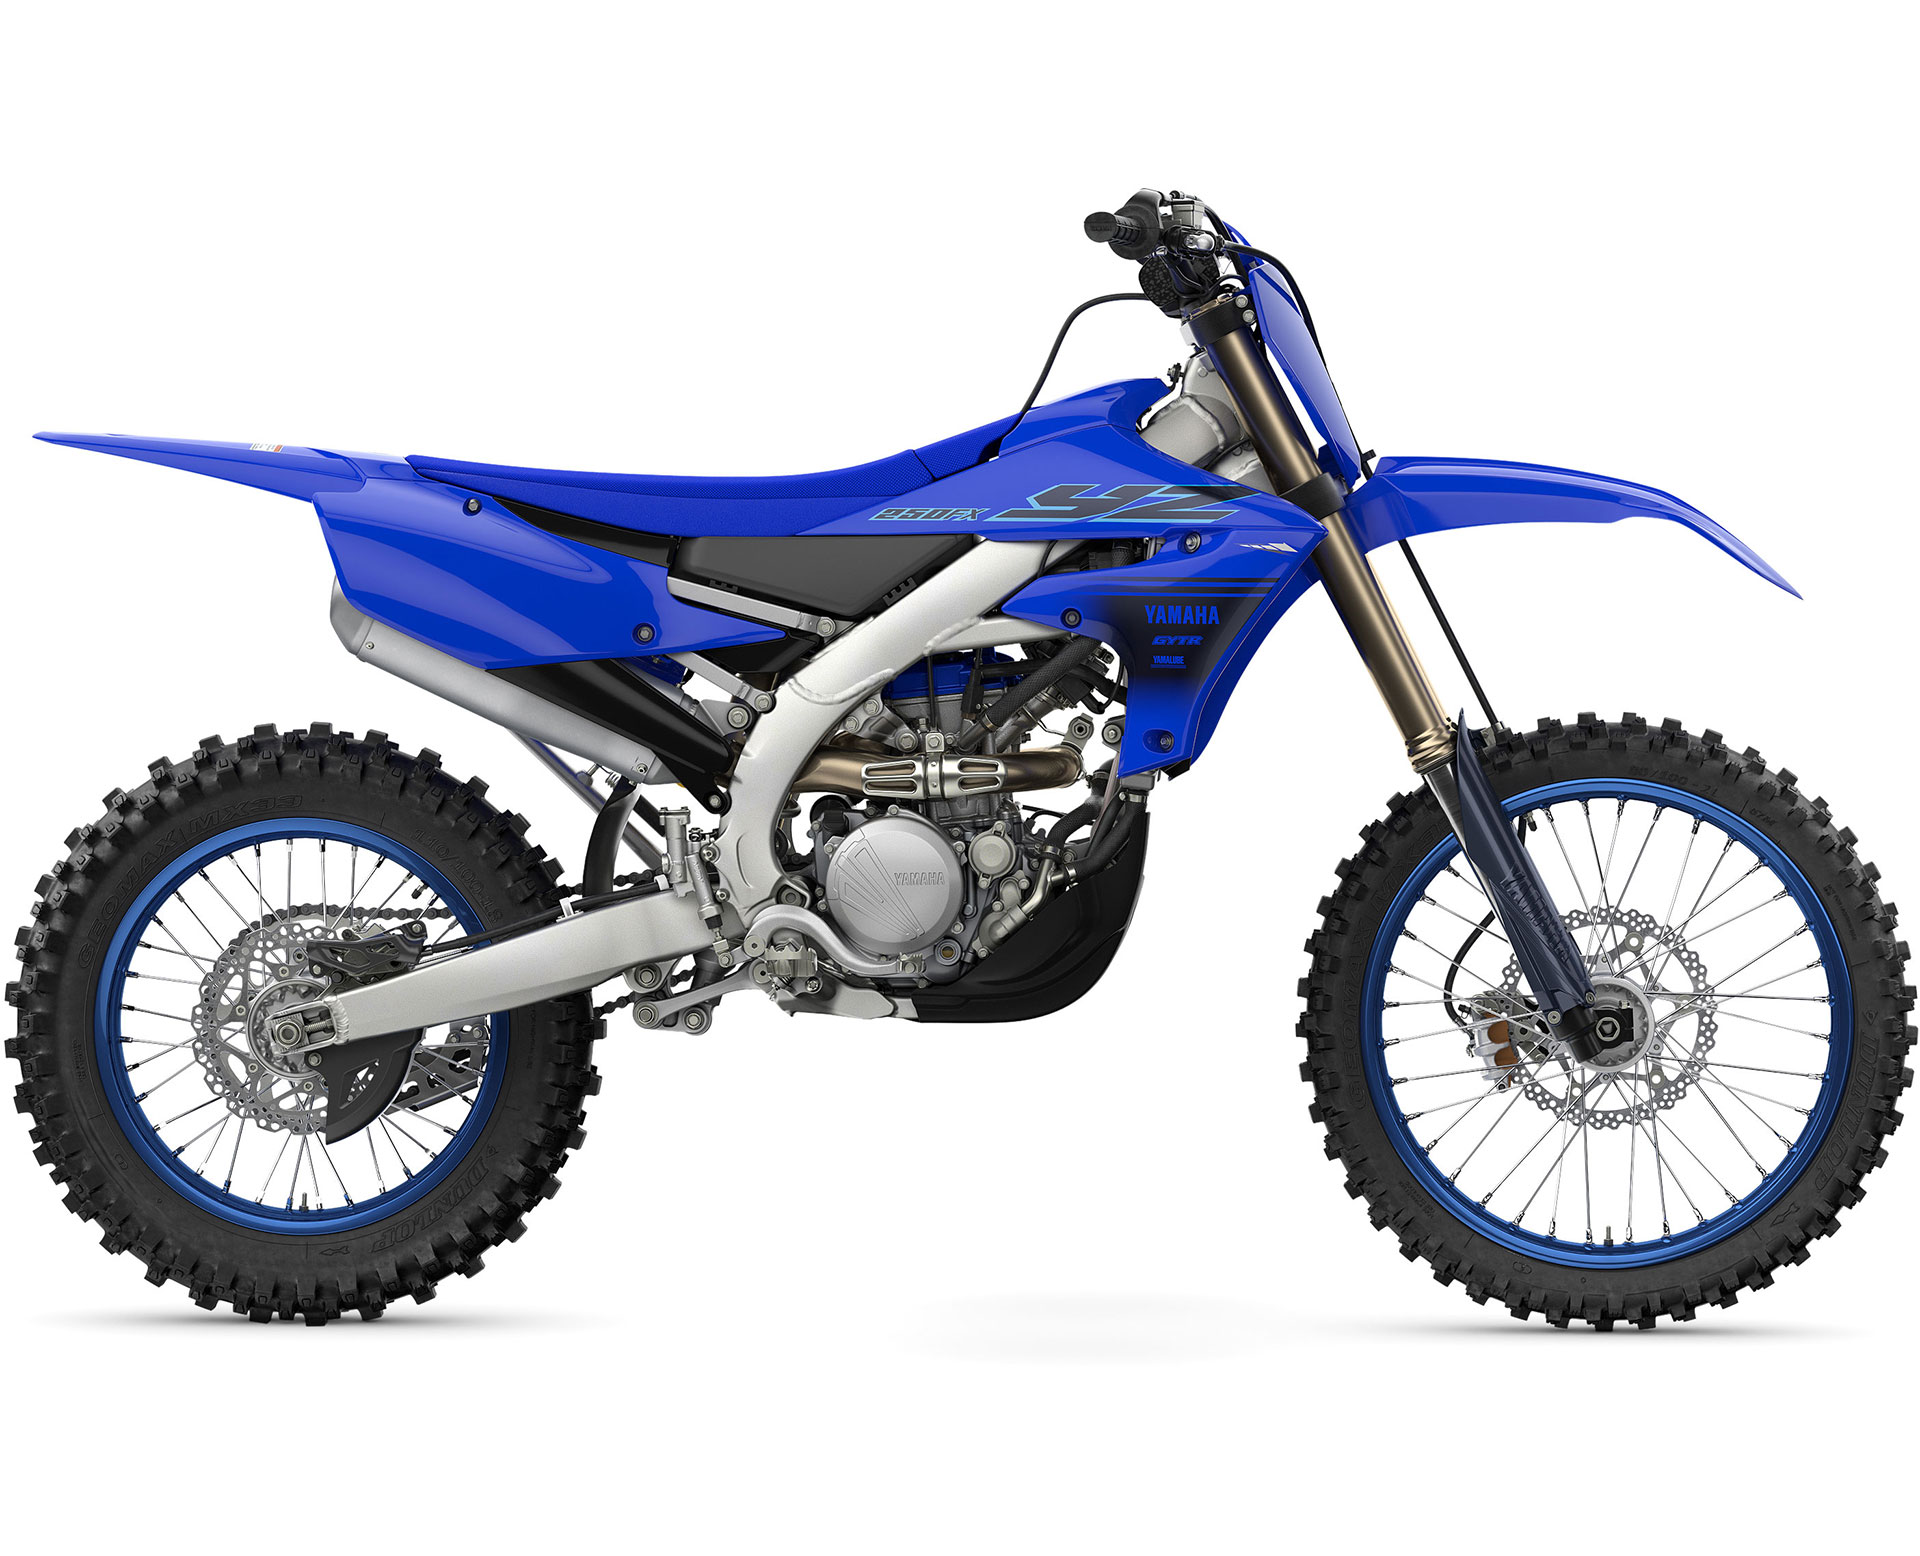 Thumbnail of your customized YZ250FX 2024